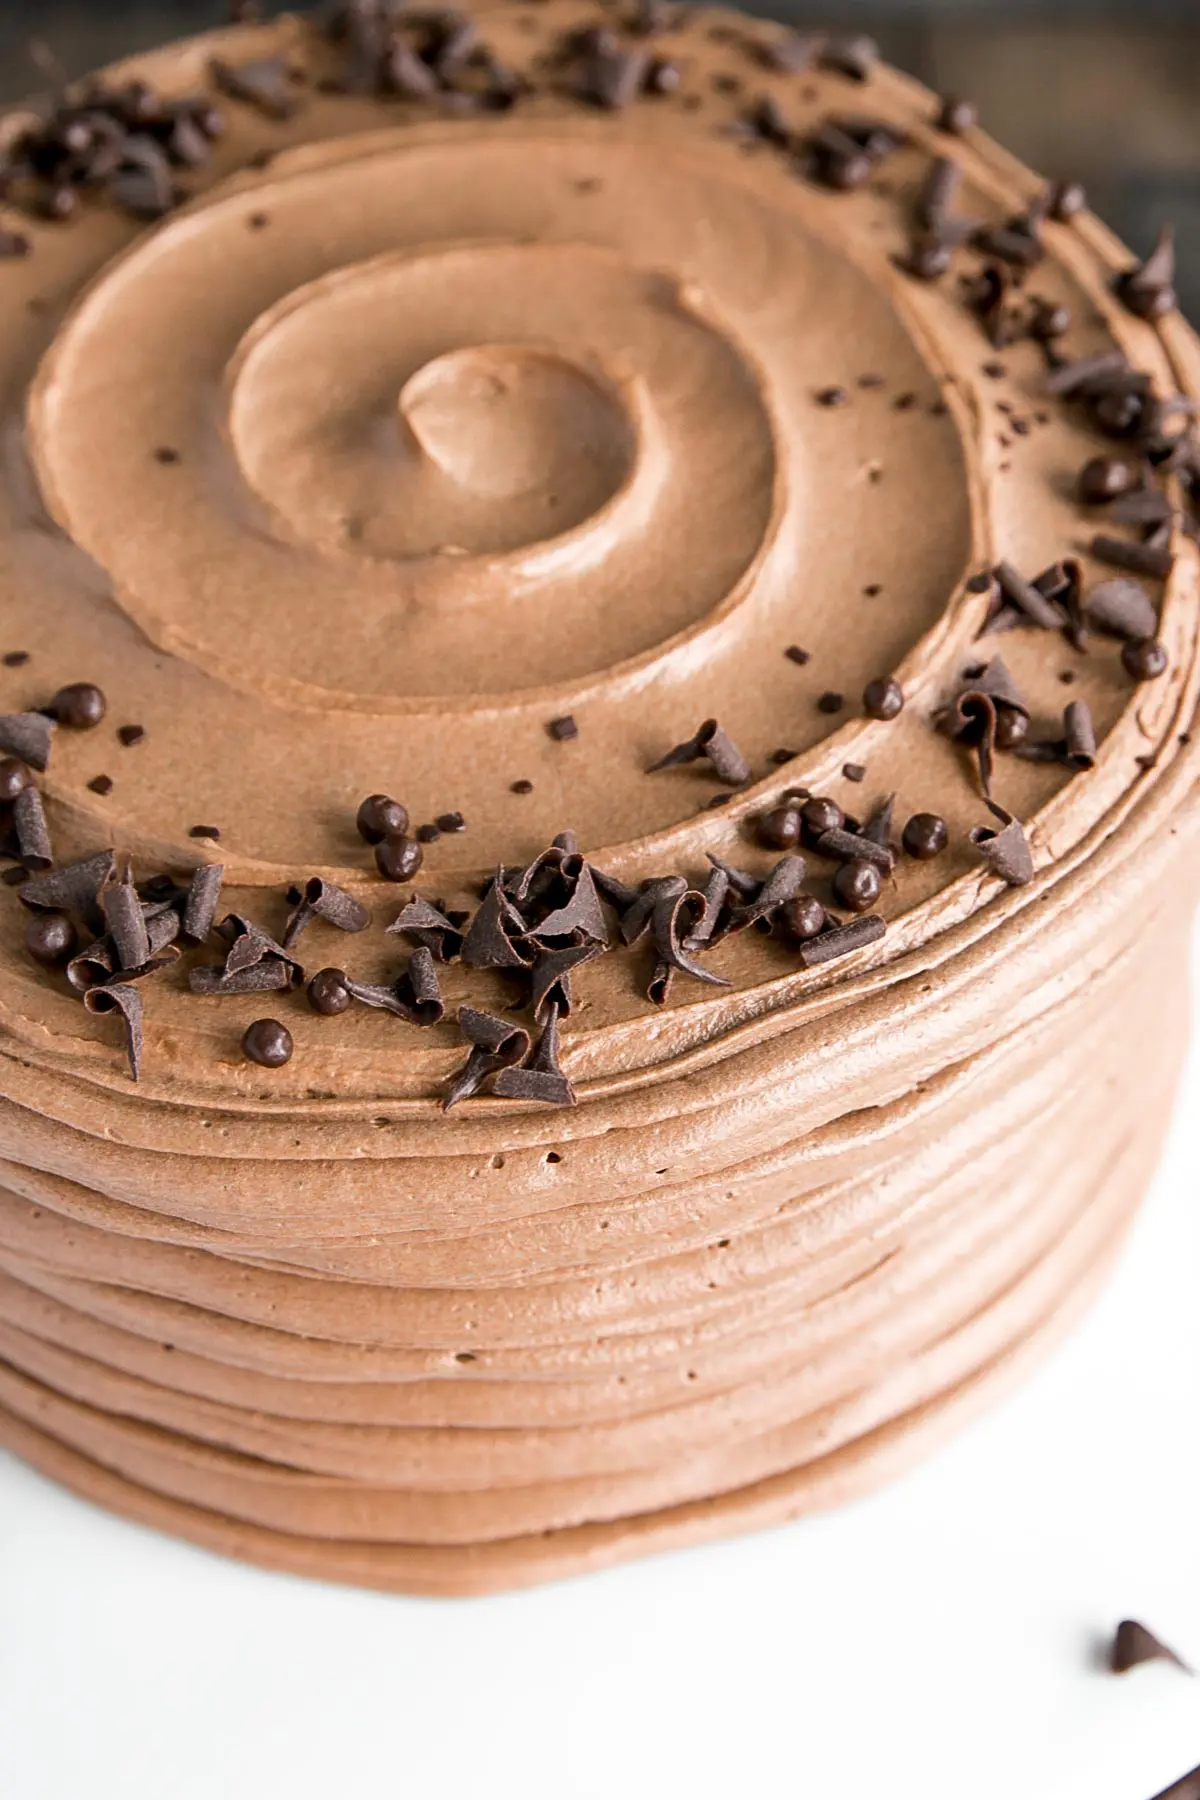 Close up of chocolate curls on the top of the cake.